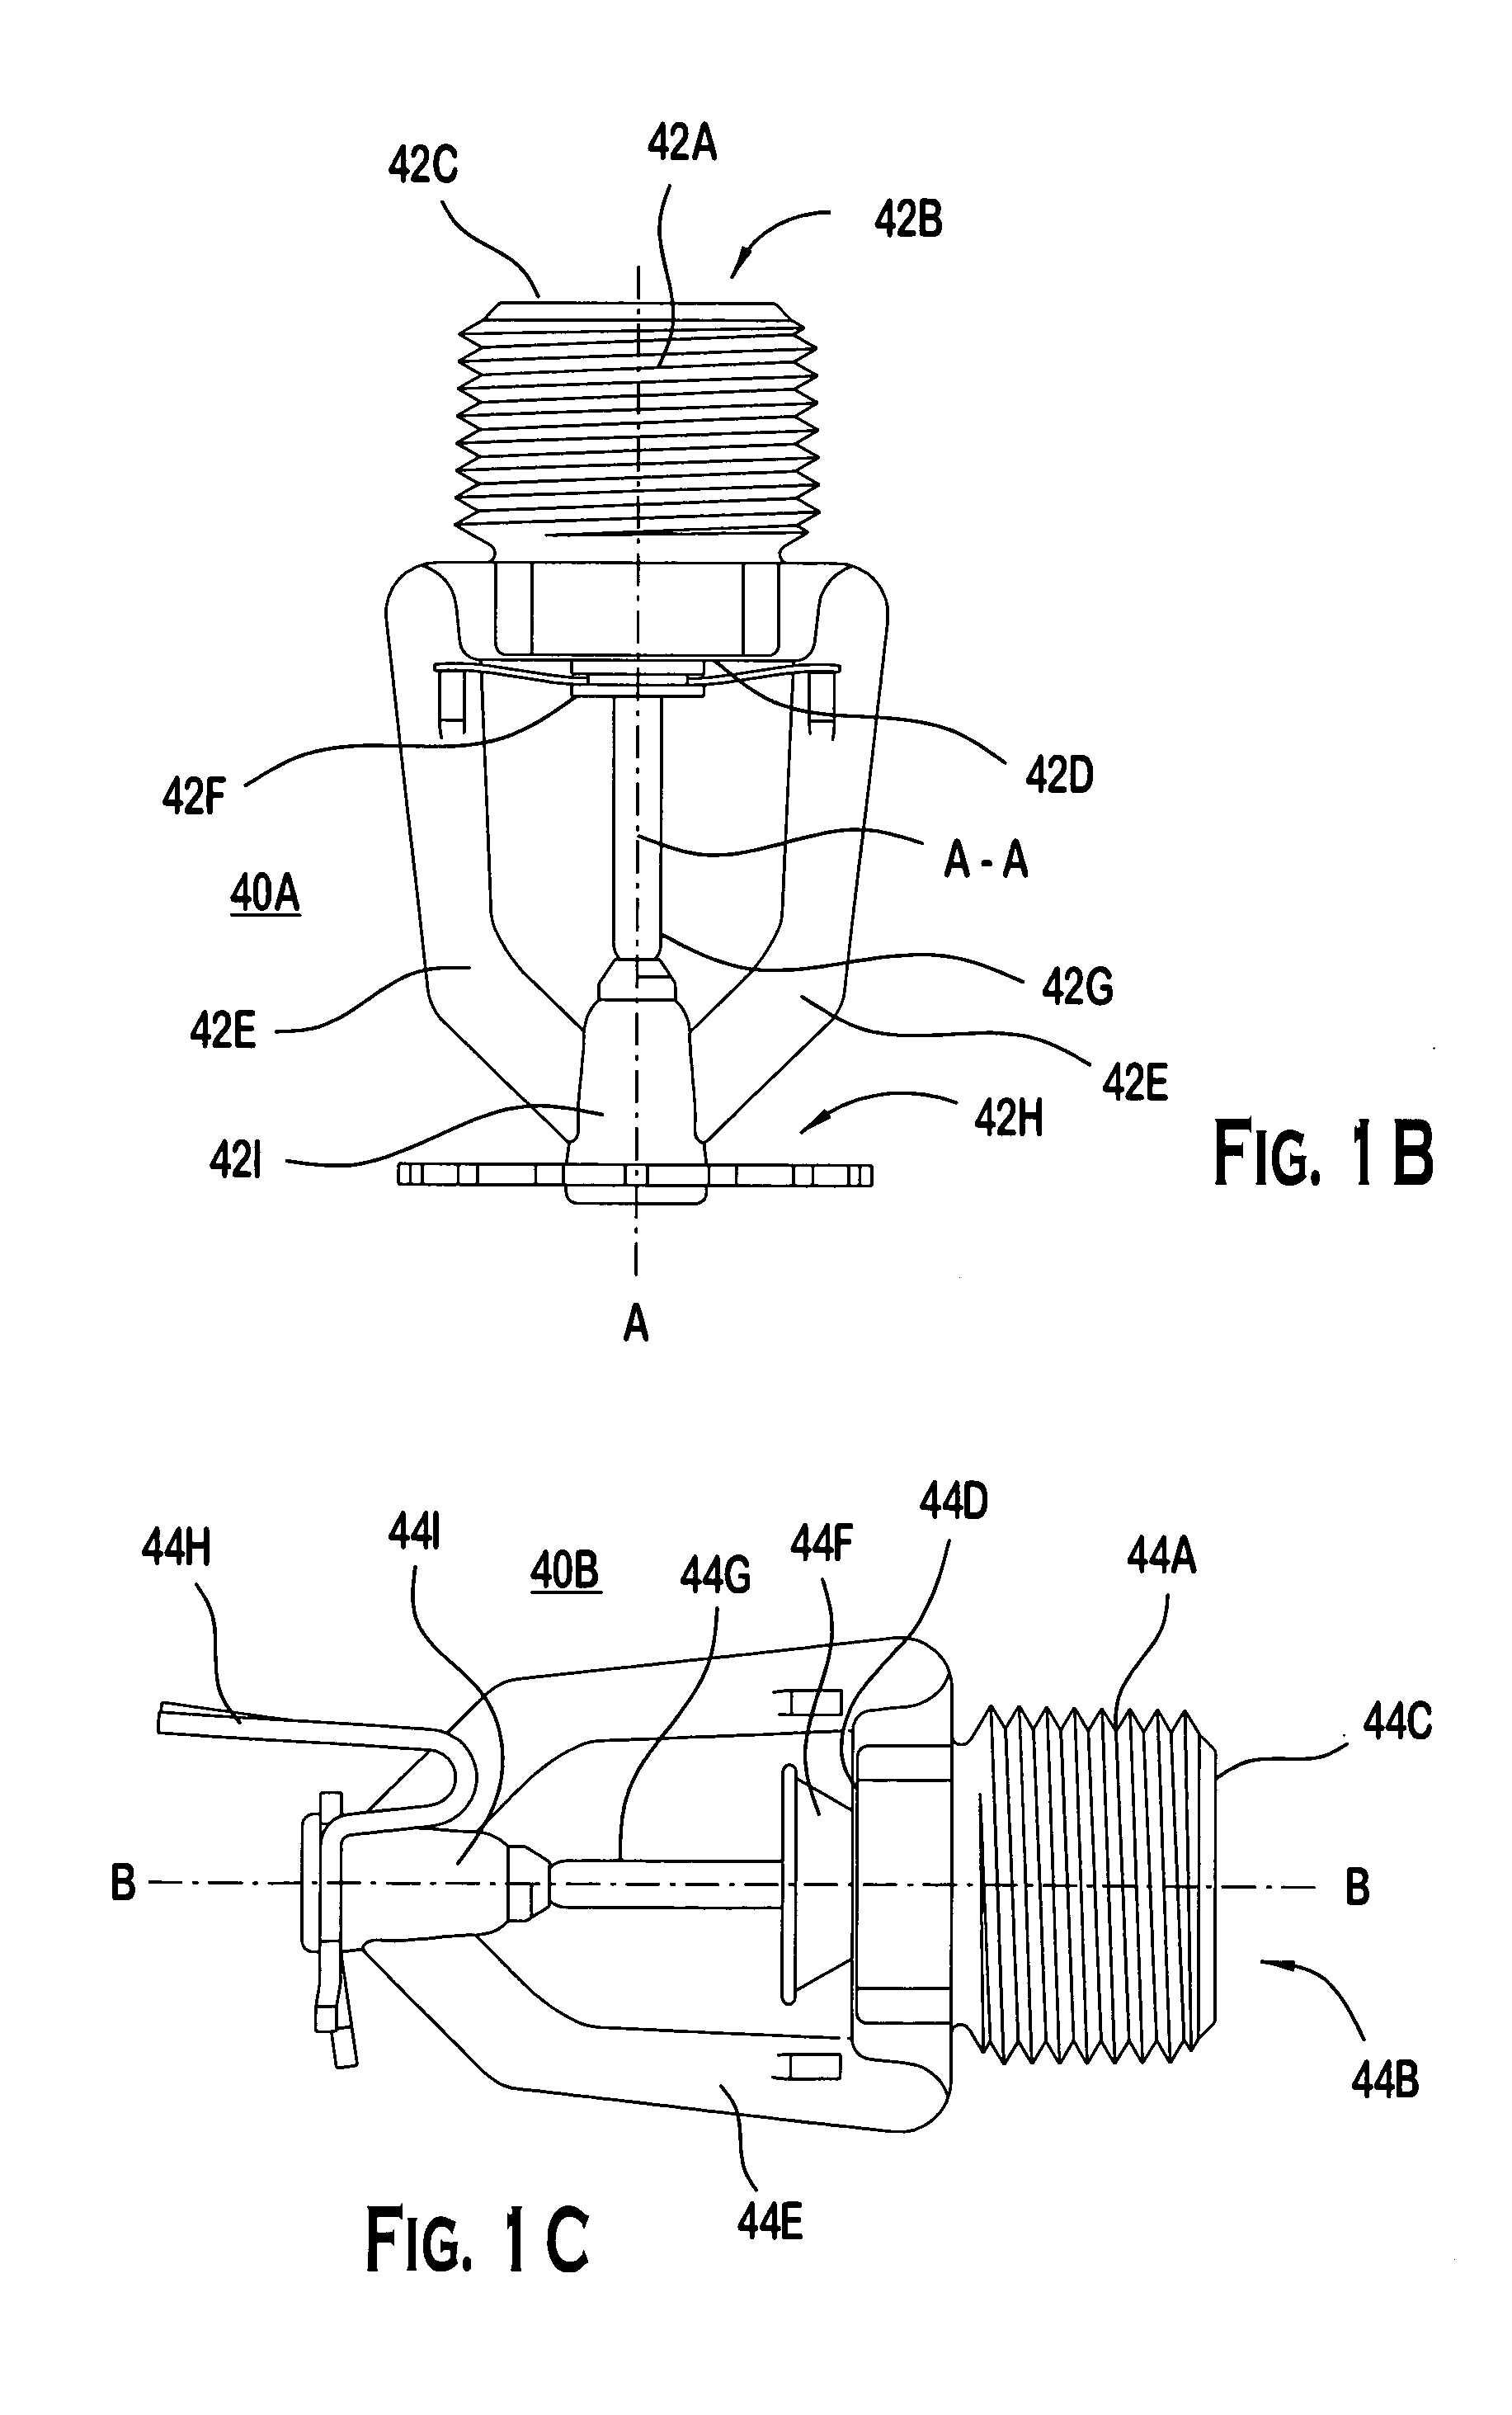 Residential dry sprinkler design method and system with fire resistant plastic components